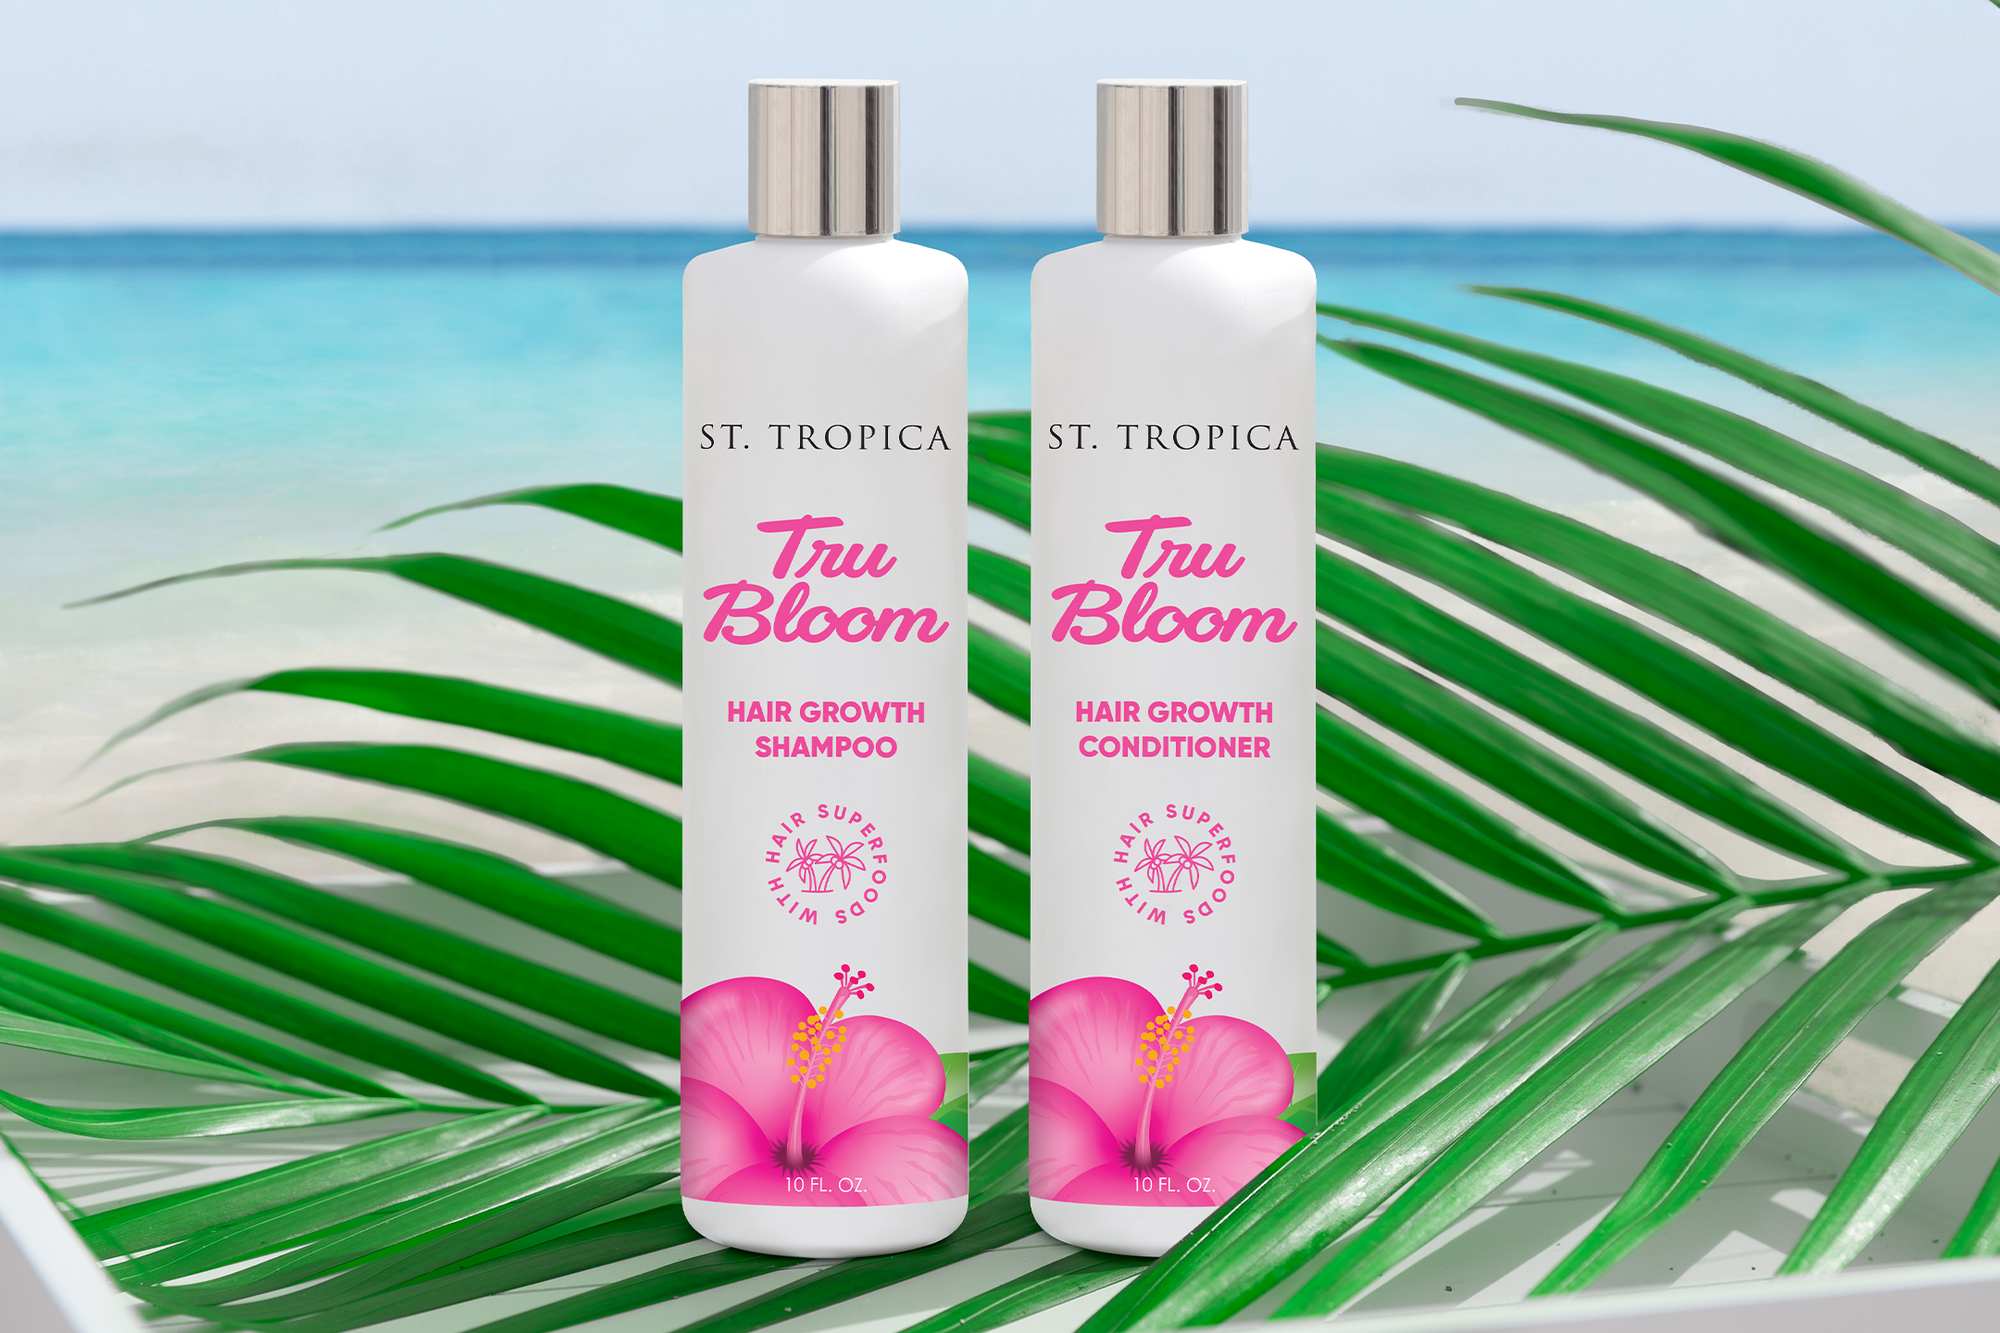 The Tru Bloom Hair Growth Shampoo and Conditioner sitting on a palm leaf on a tropical beach